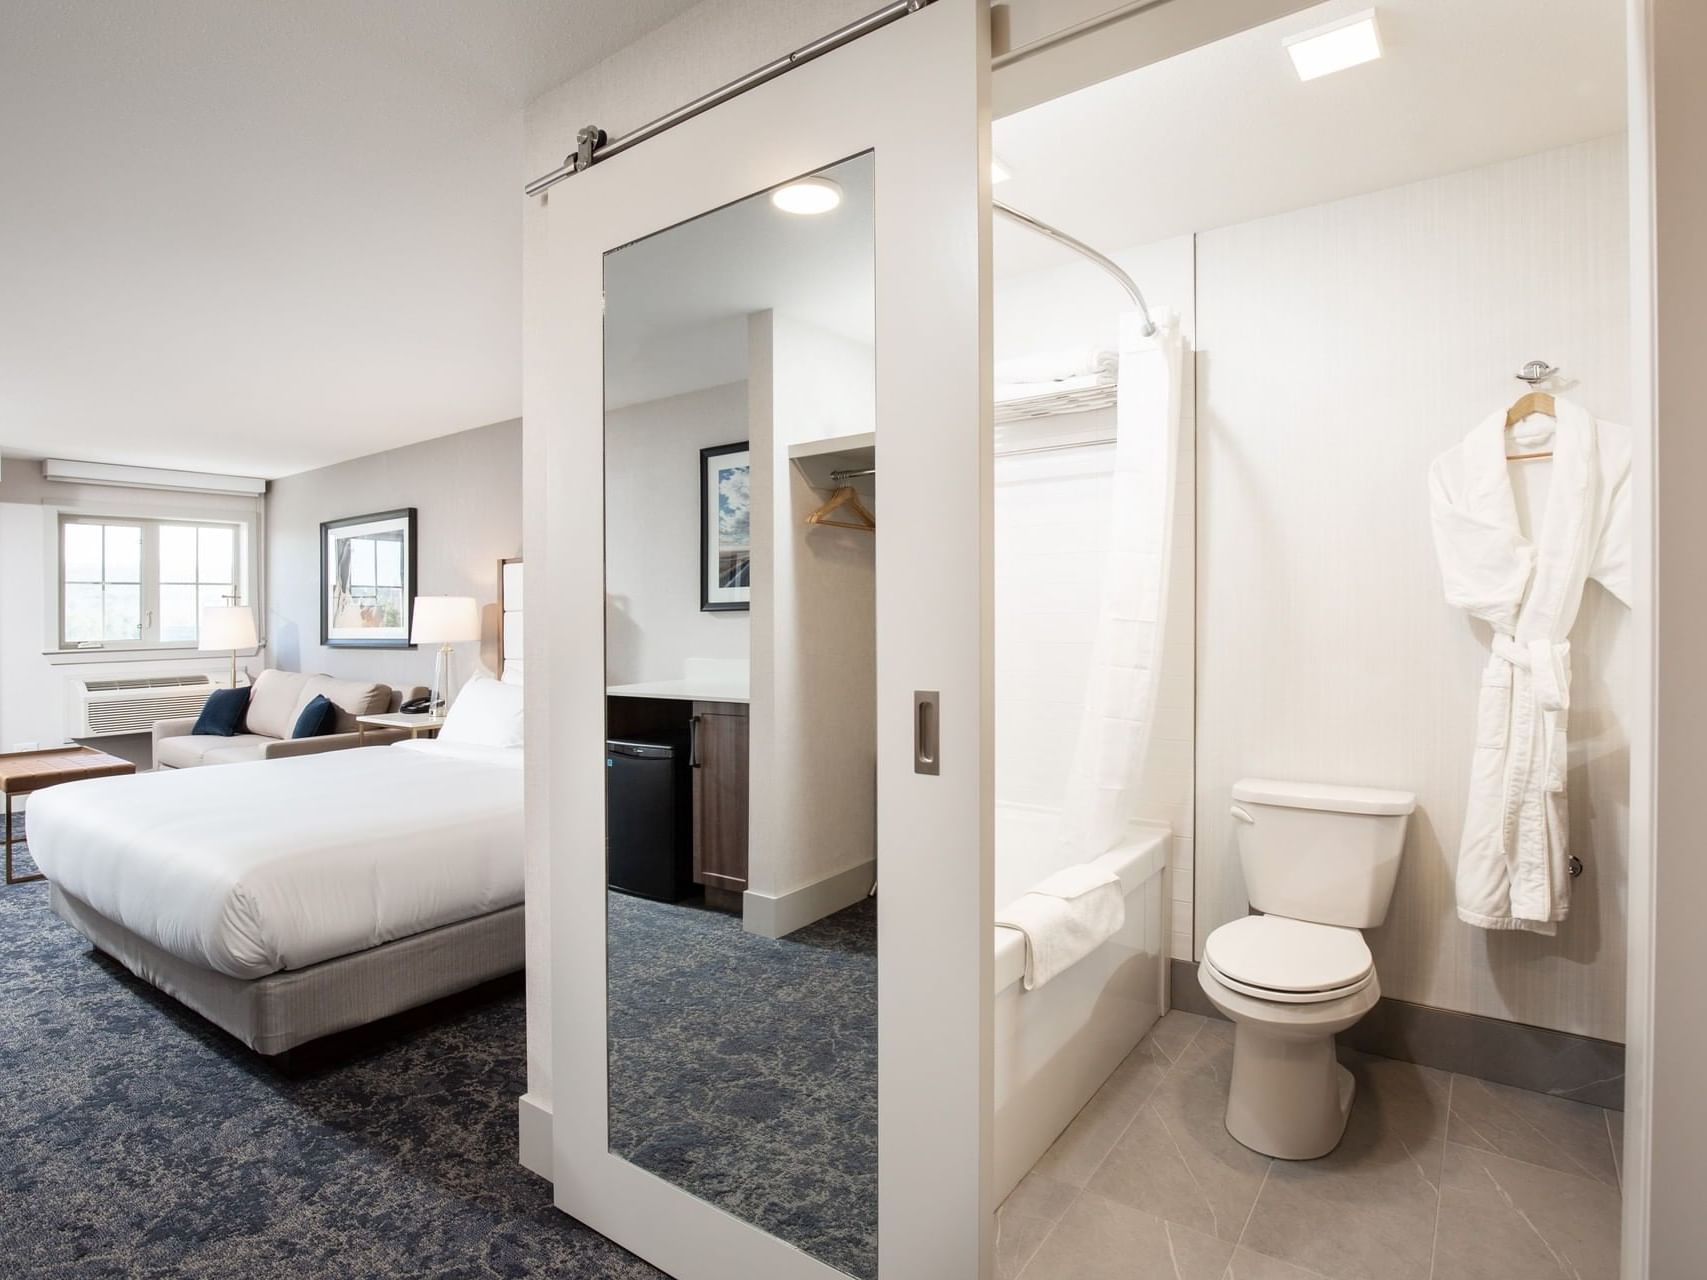 a bed and bathroom in a hotel room